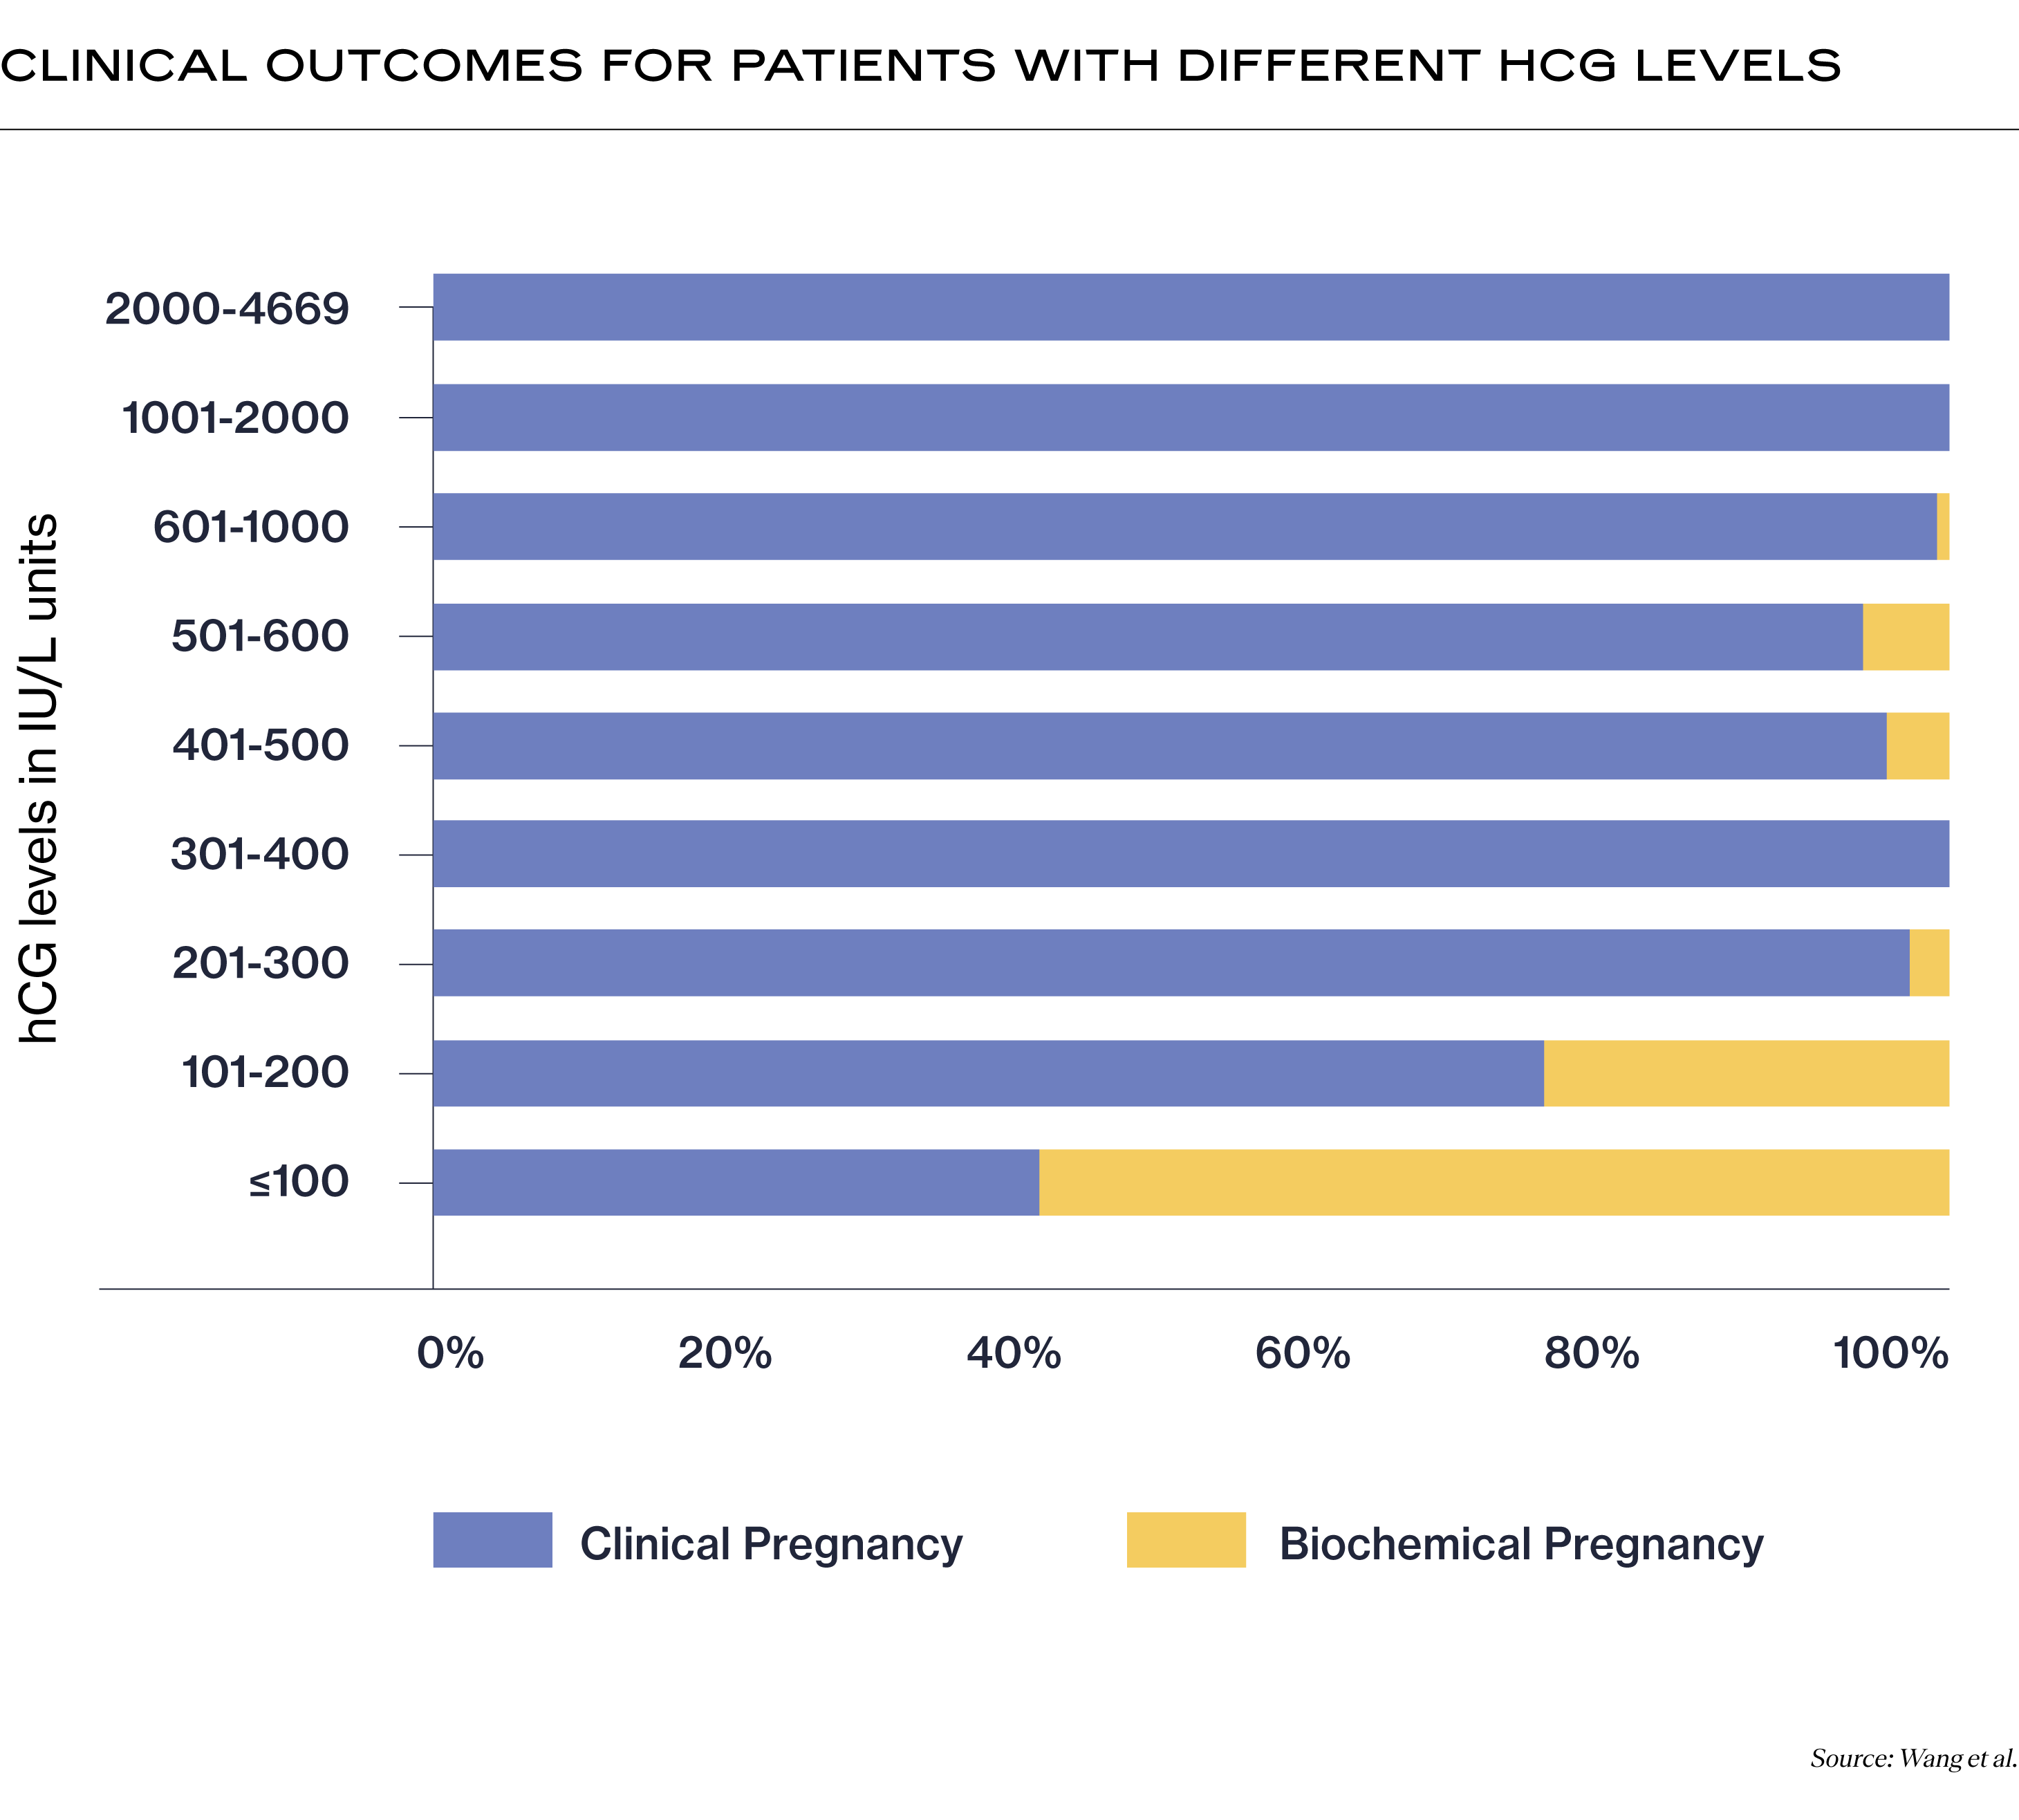 Clinical Outcomes for Patients with Different HCG Levels